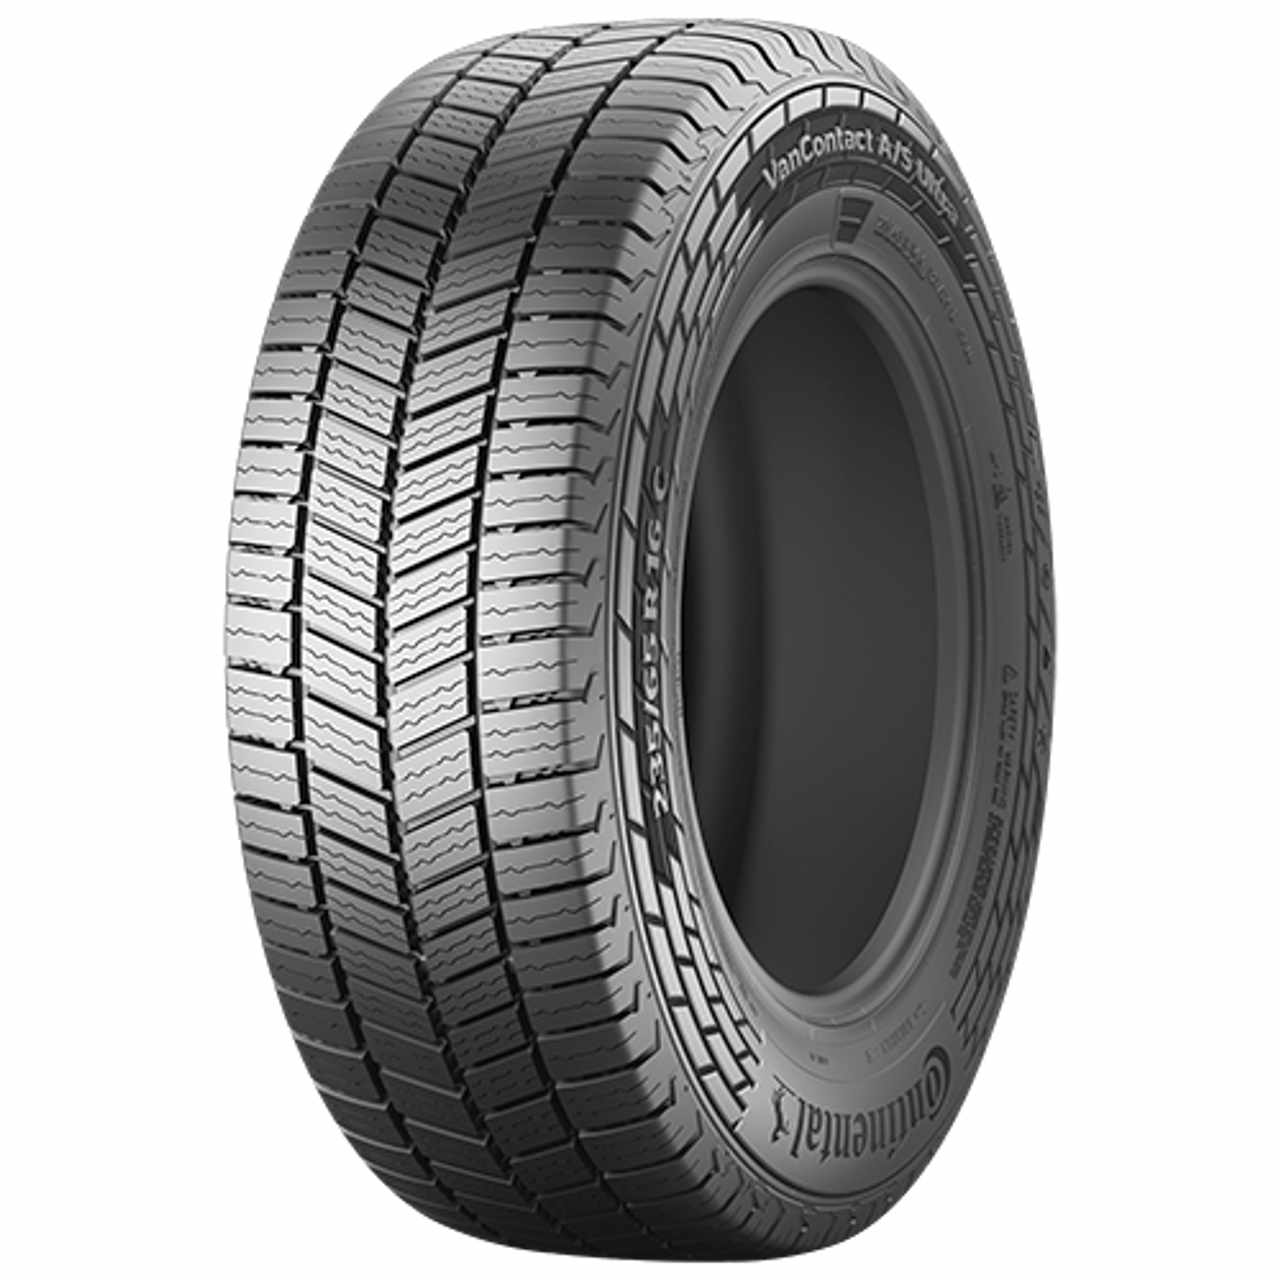 CONTINENTAL VANCONTACT A/S ULTRA 215/70R15C 109S BSW von Continental